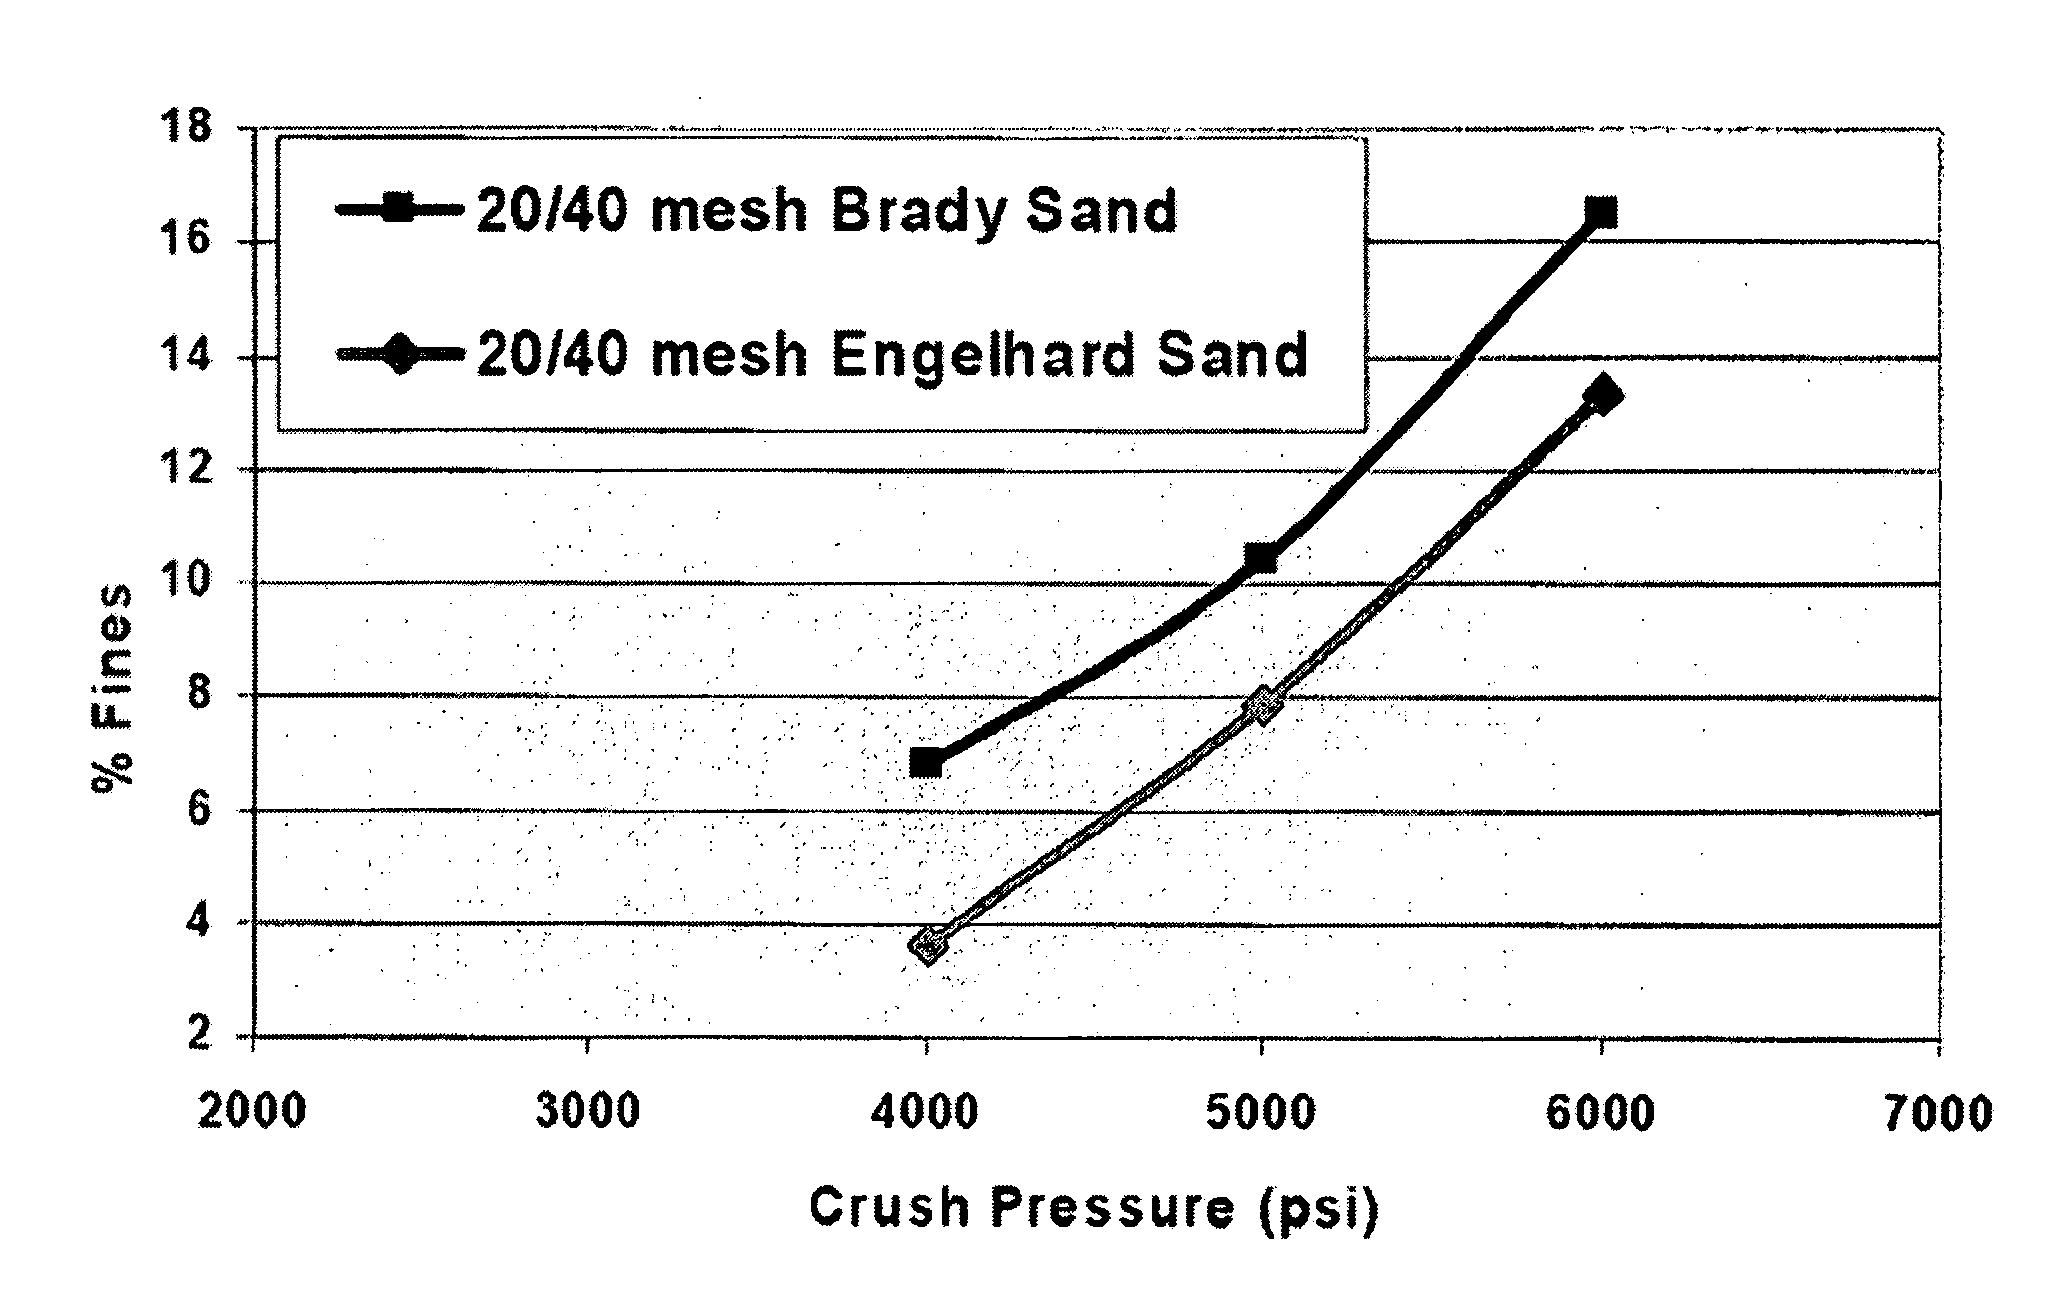 Hydraulic fracturing proppants and methods of use